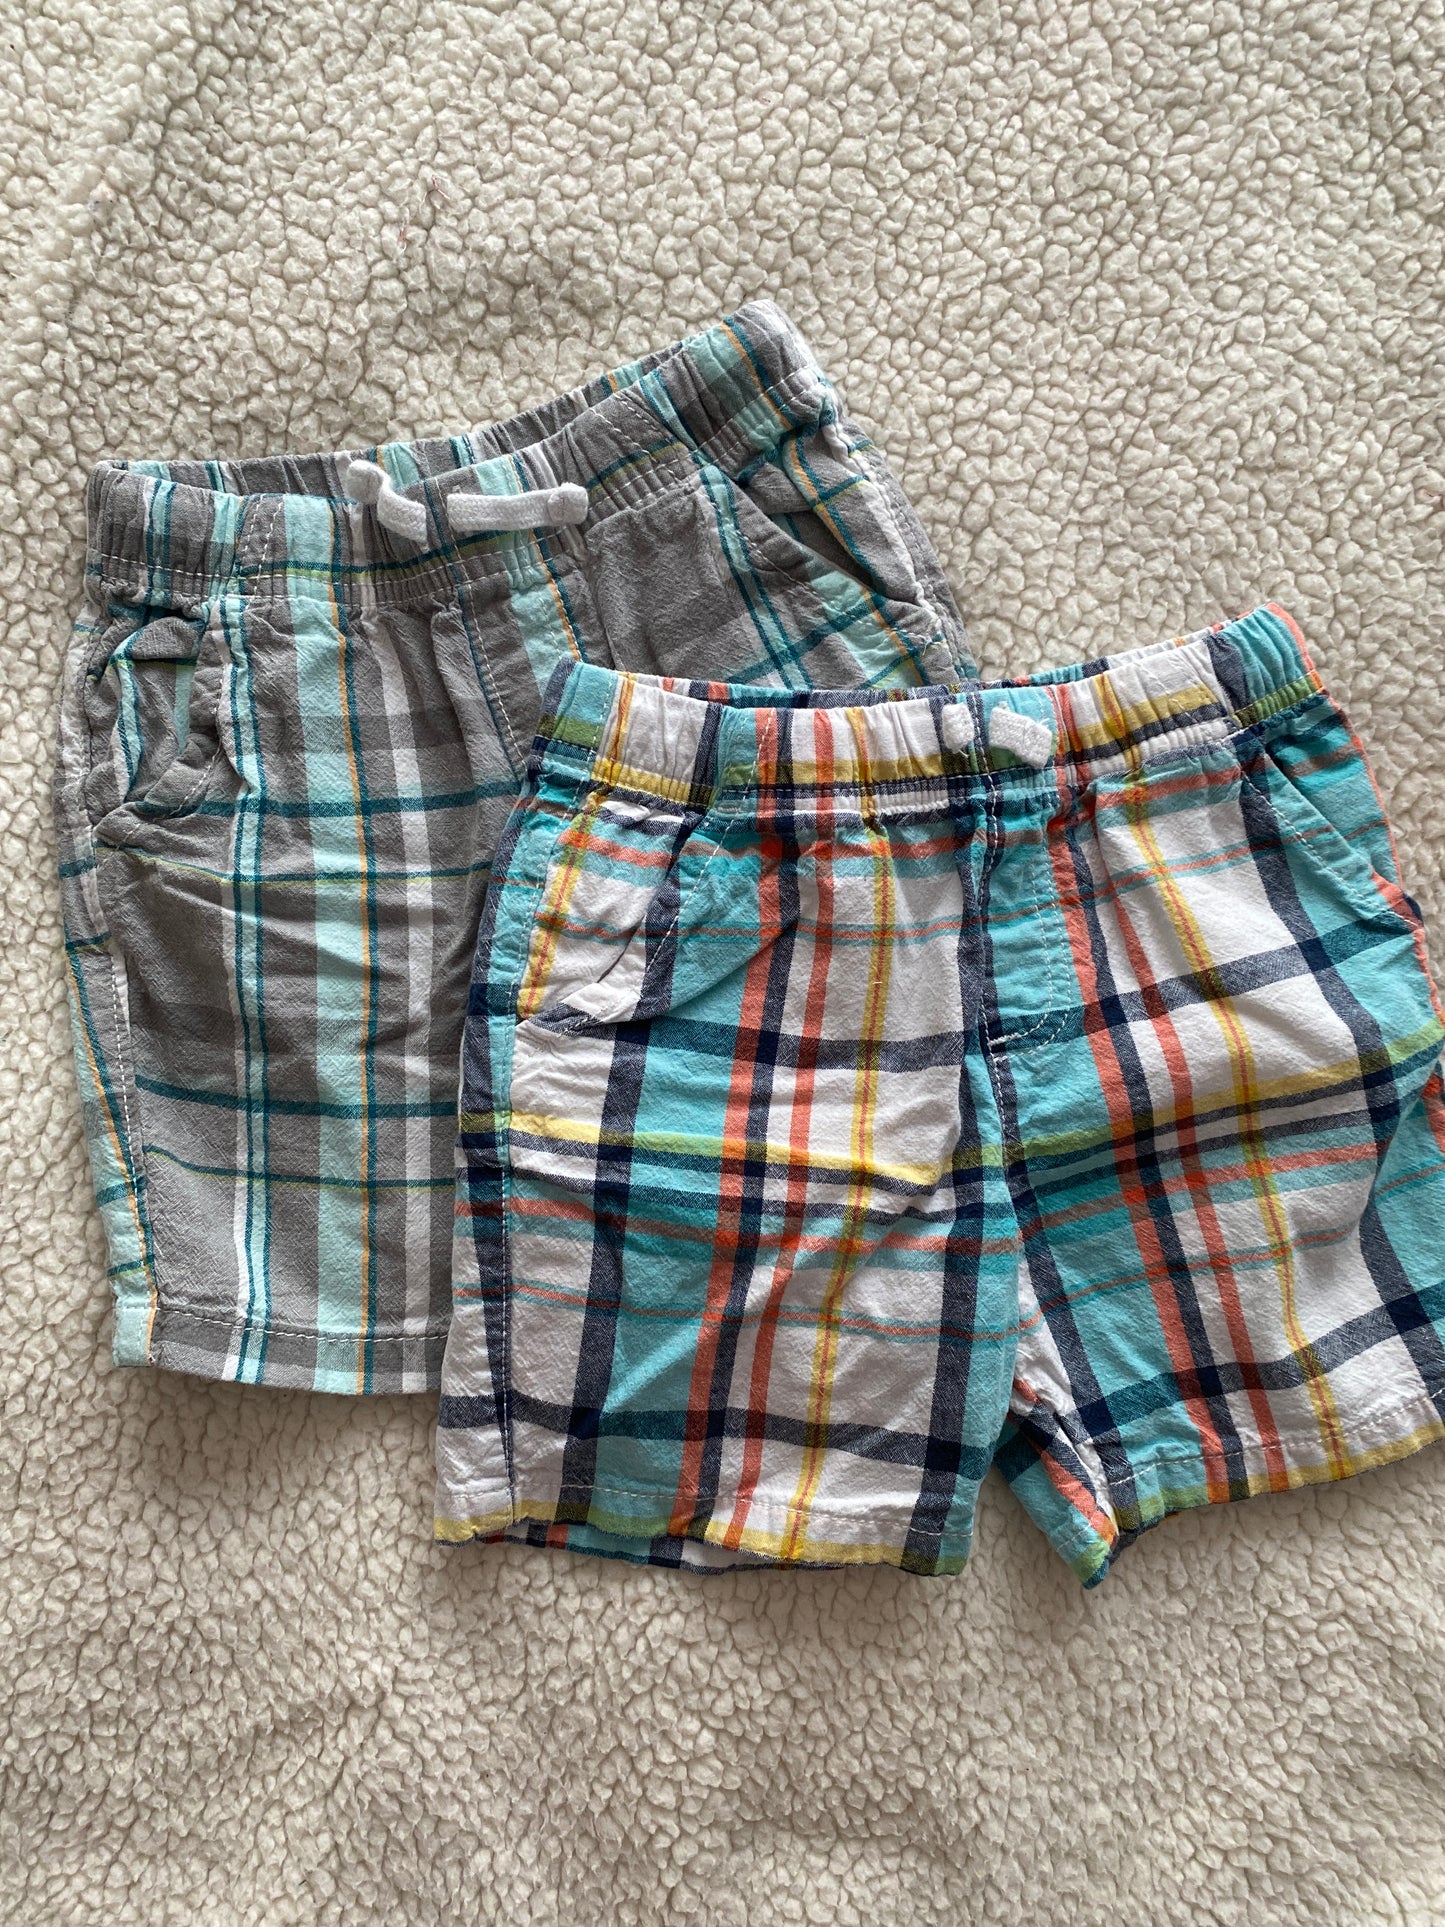 Jumping Beans boys 4t bundle of 2 shorts